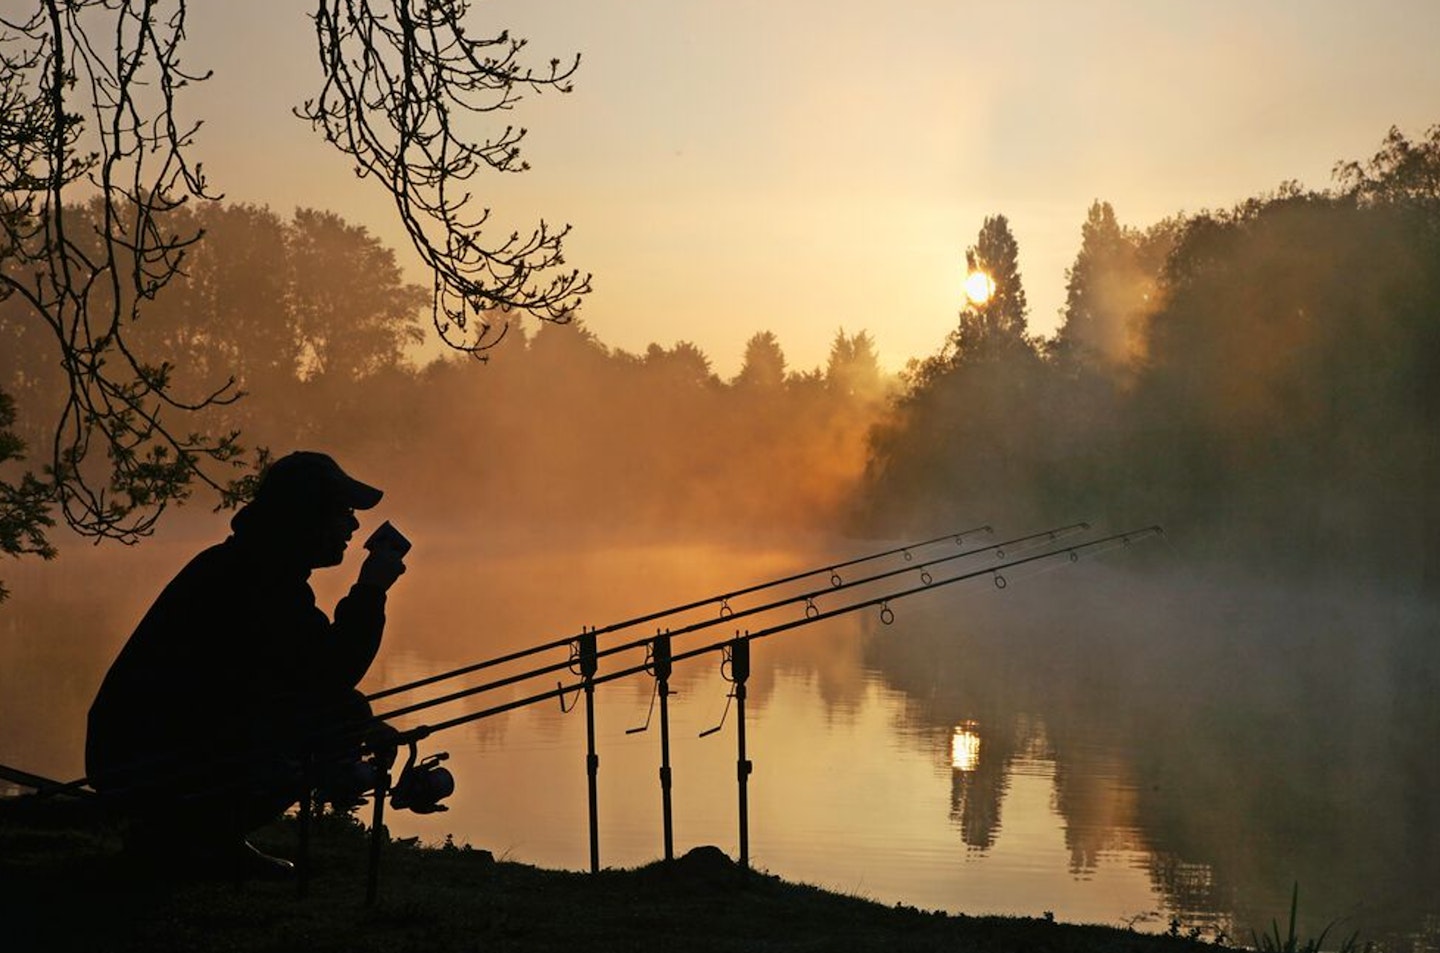 Fishing at dawn and dusk maximises your chances of catching